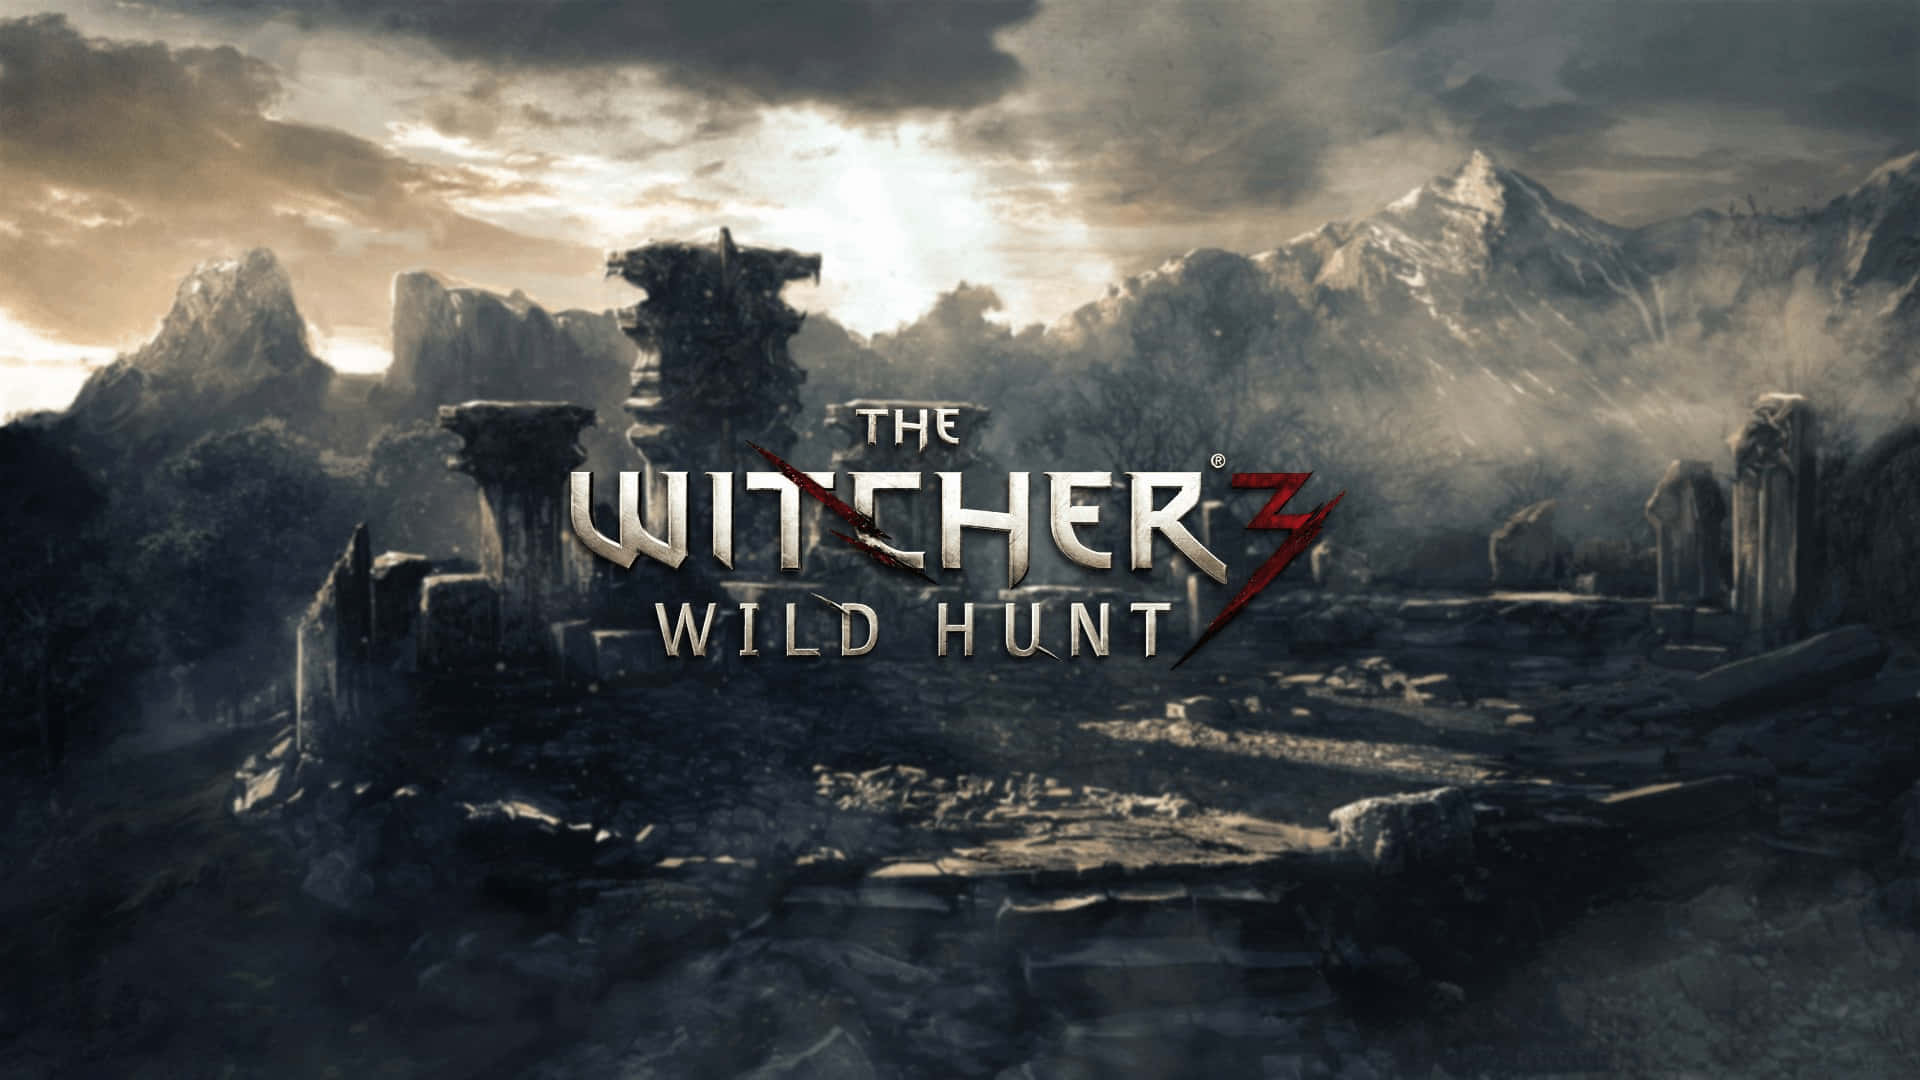 An Epic Fantasy Adventure RPG Awaits in Witcher 3 Wallpaper